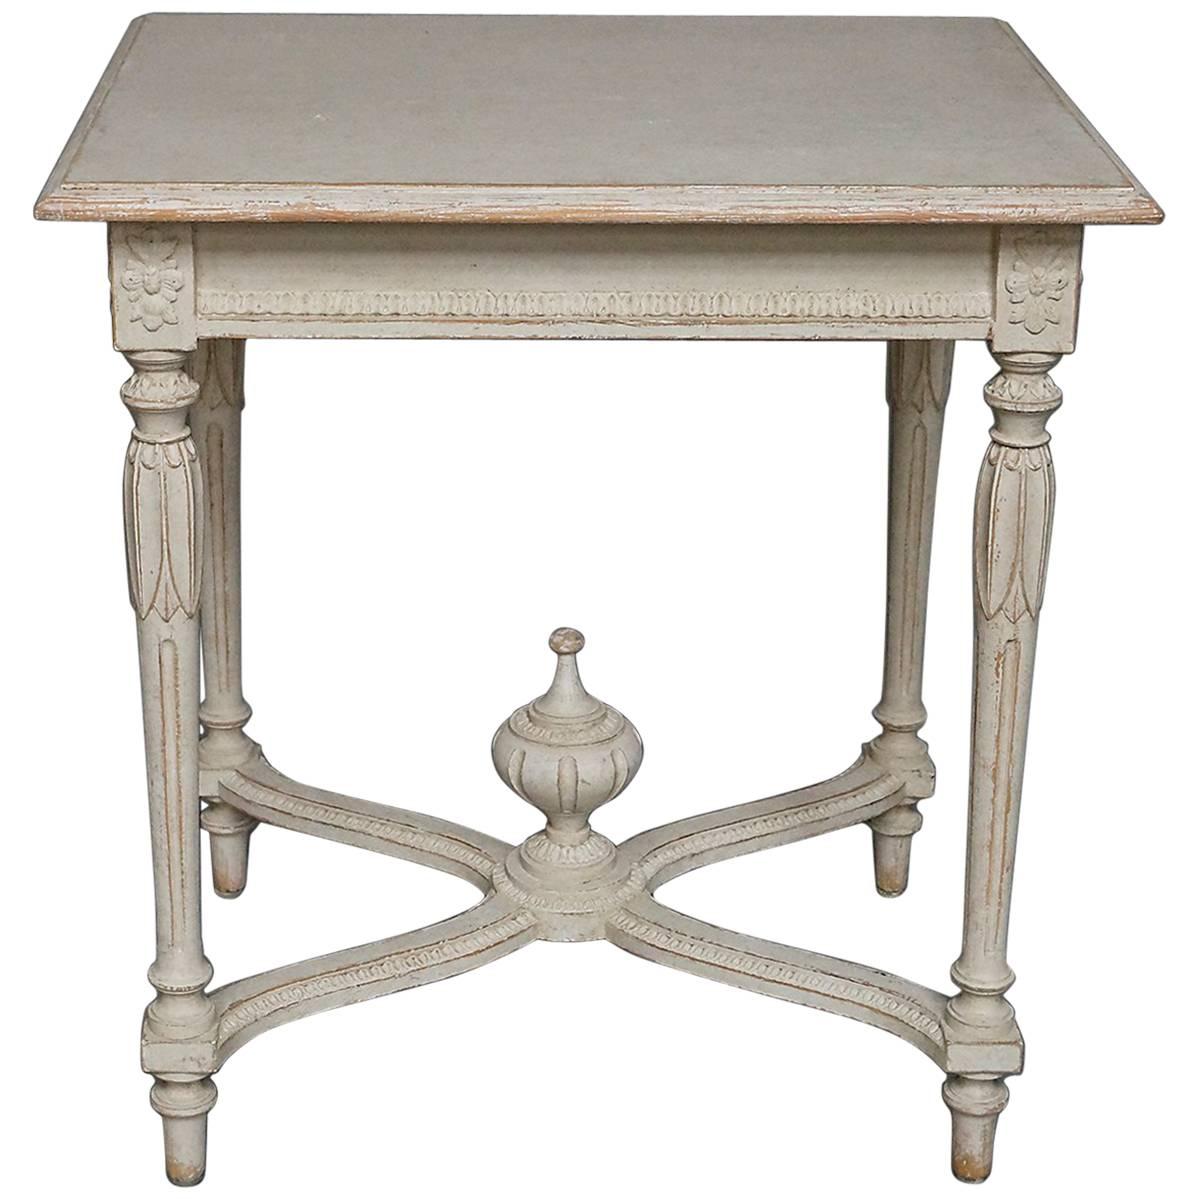 Oblong Swedish Neoclassical Table